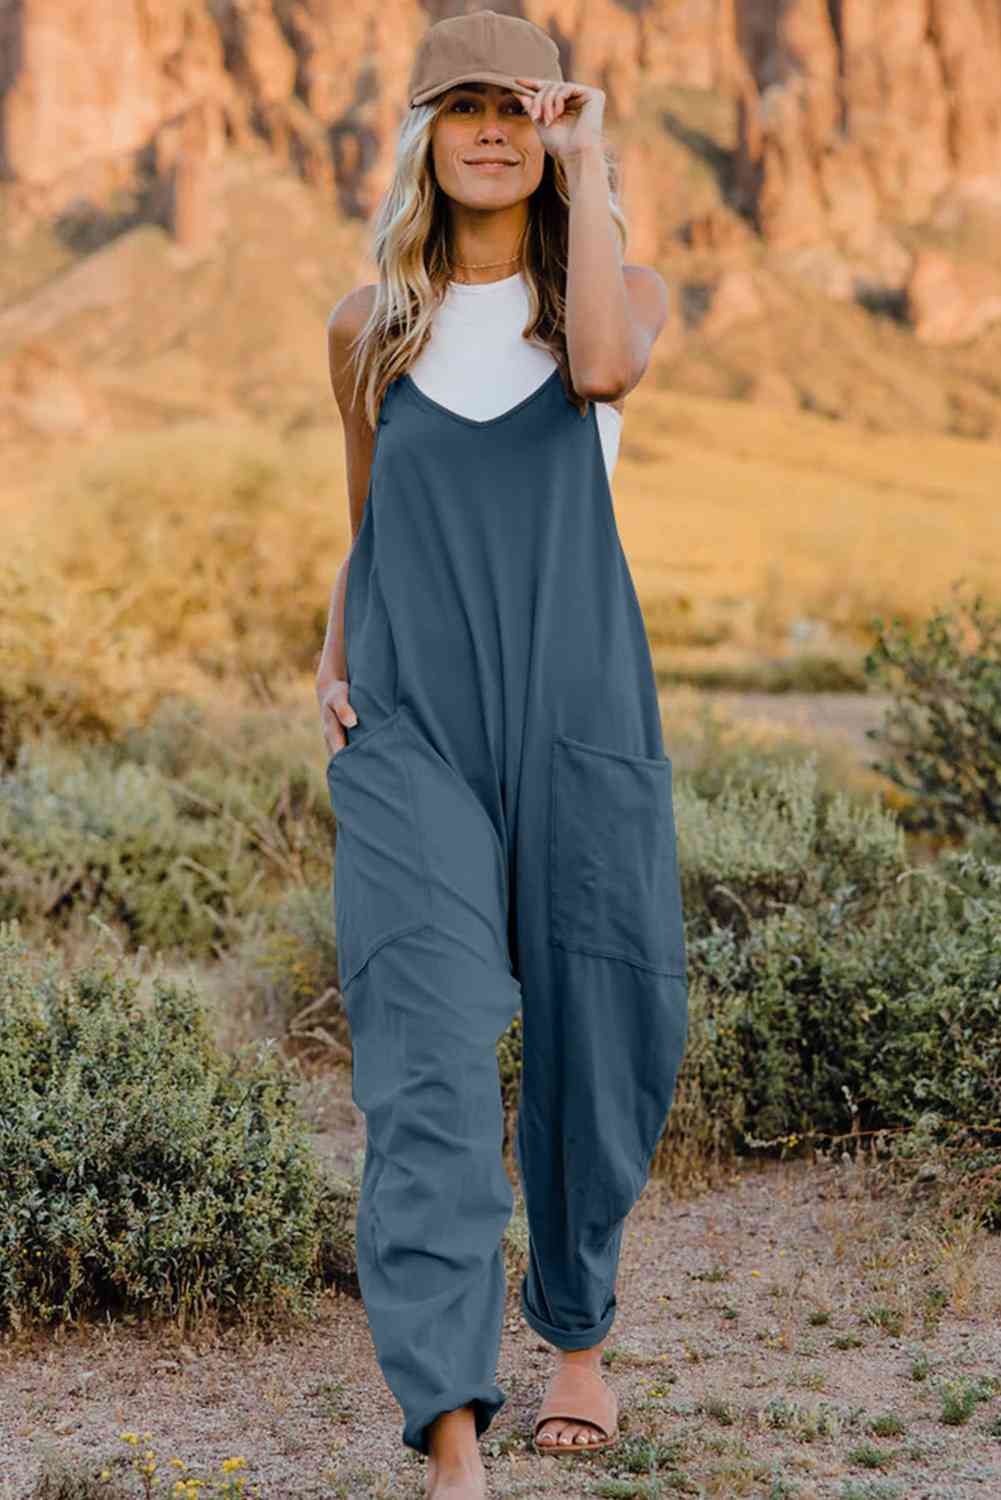 Double Take V-Neck Sleeveless Jumpsuit with Pocket Peacock Blue